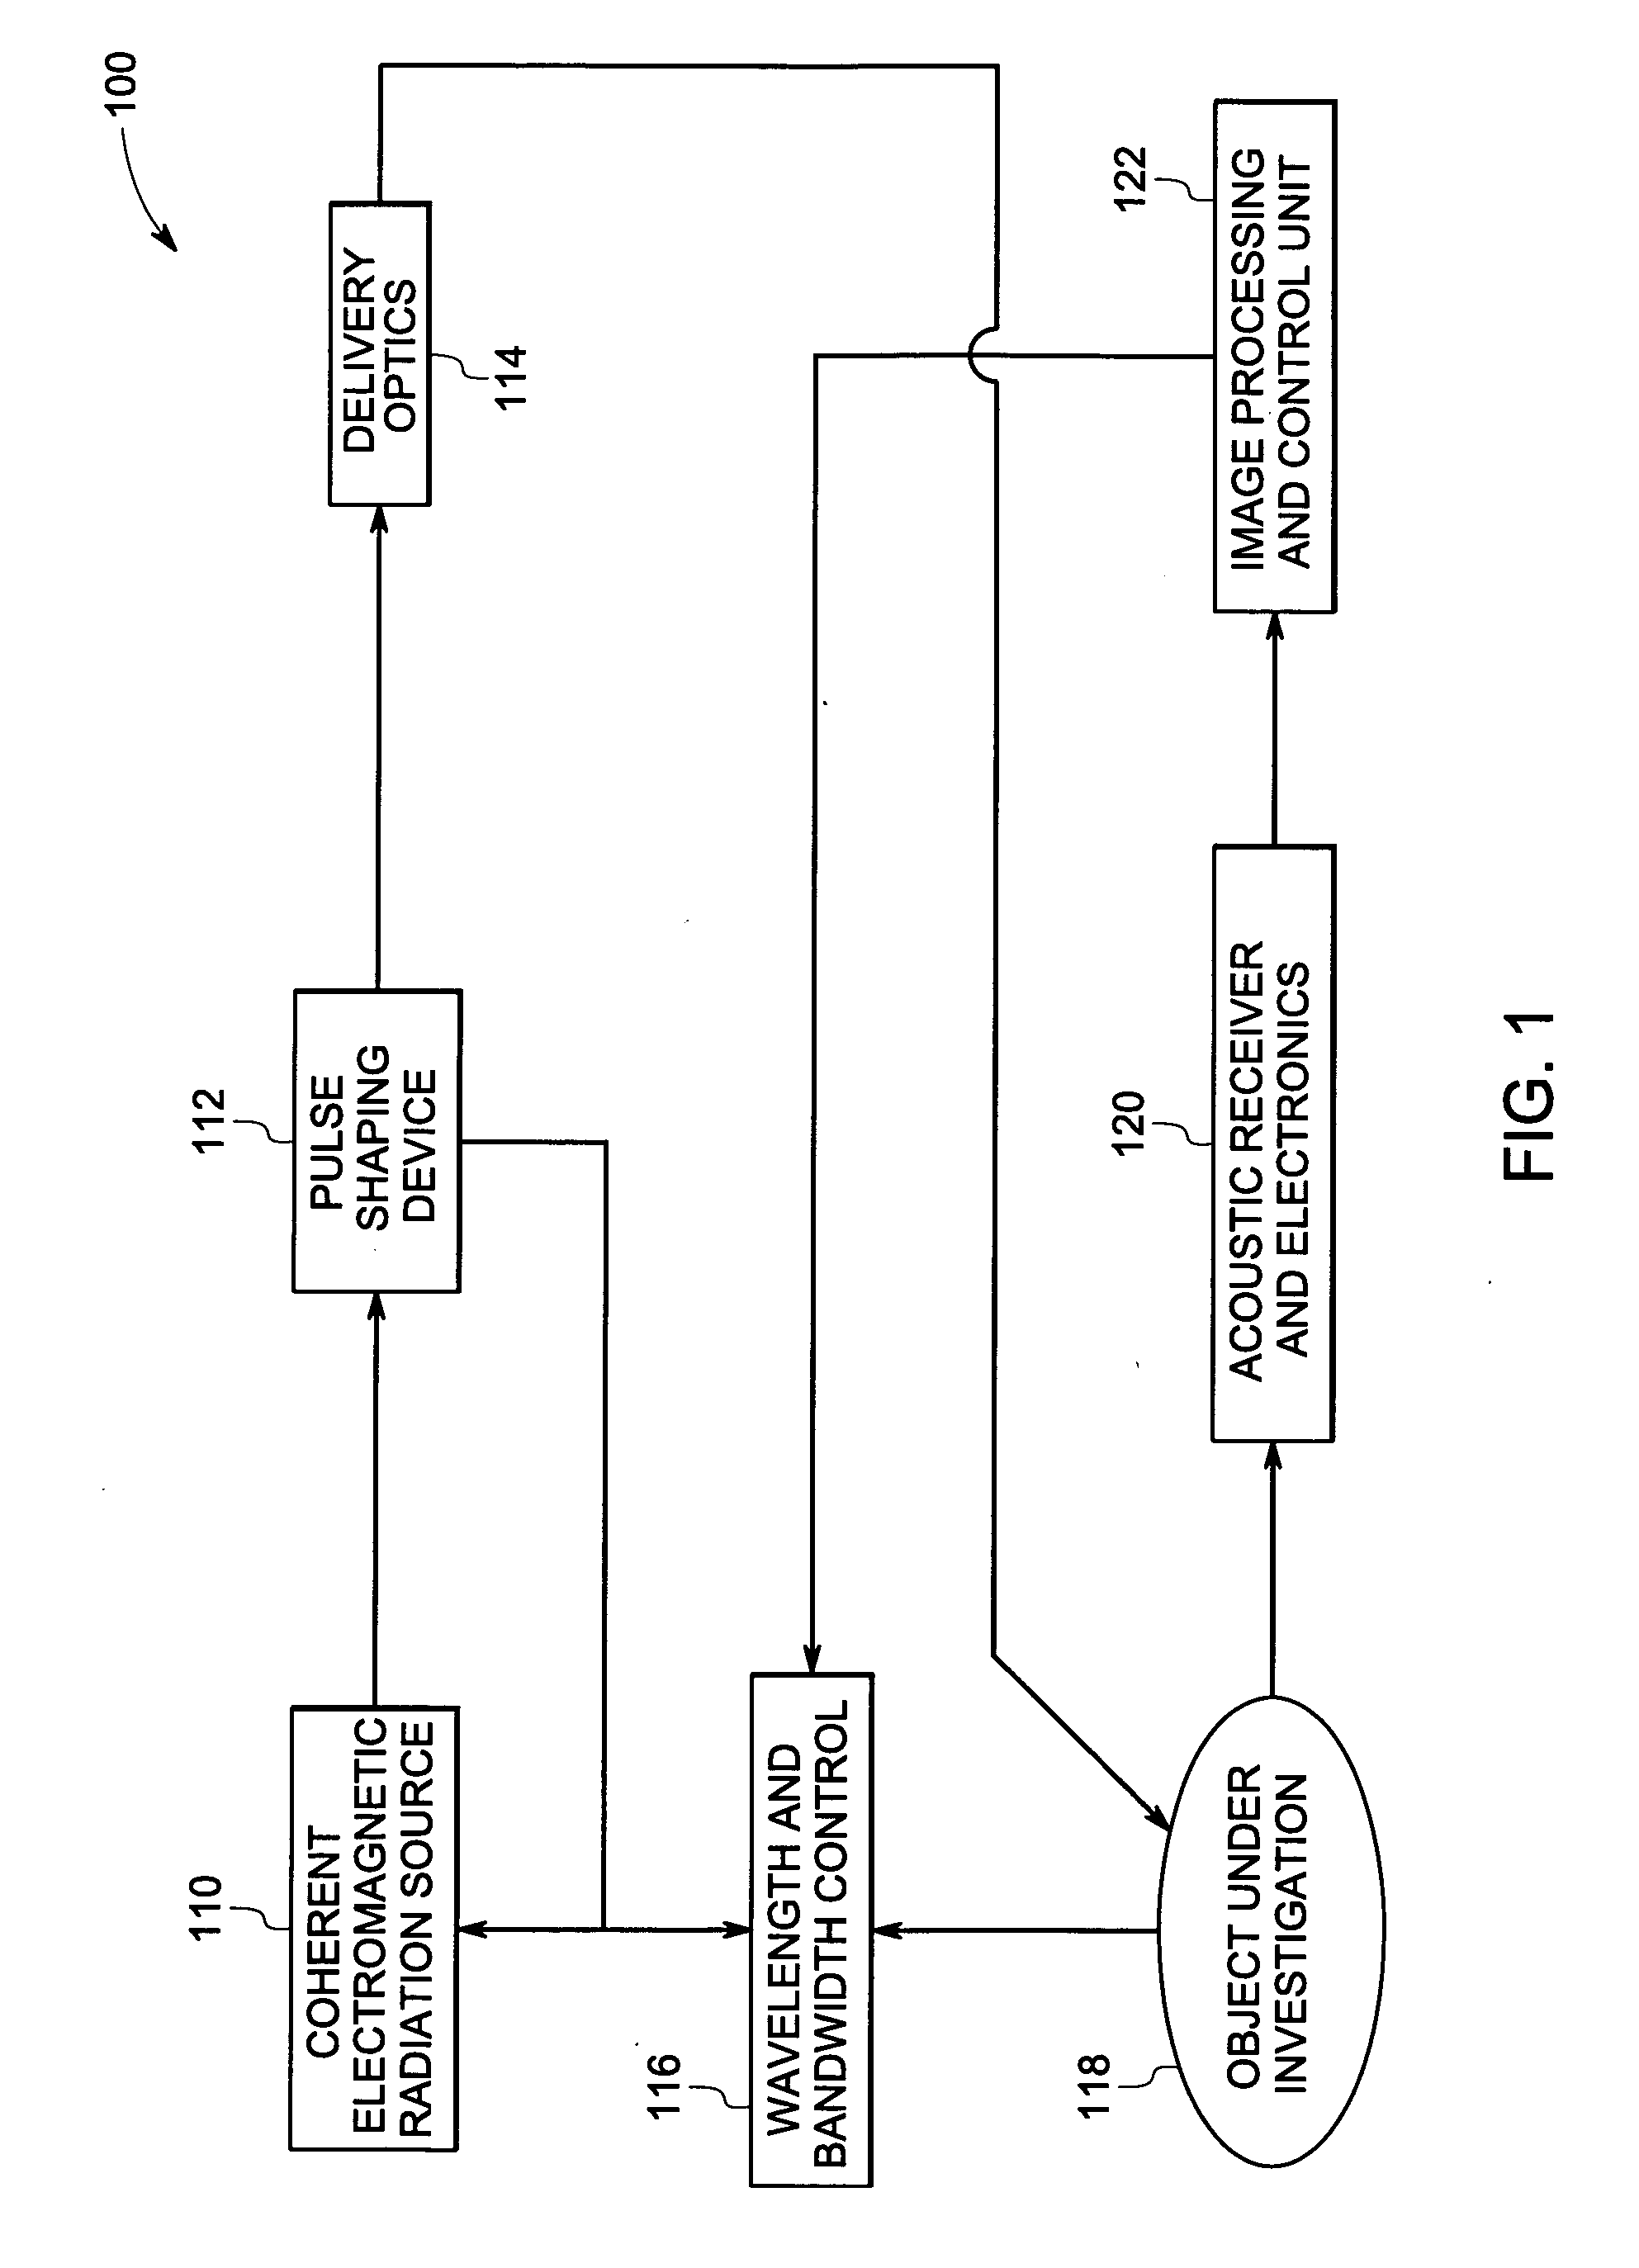 System and method for optoacoustic imaging